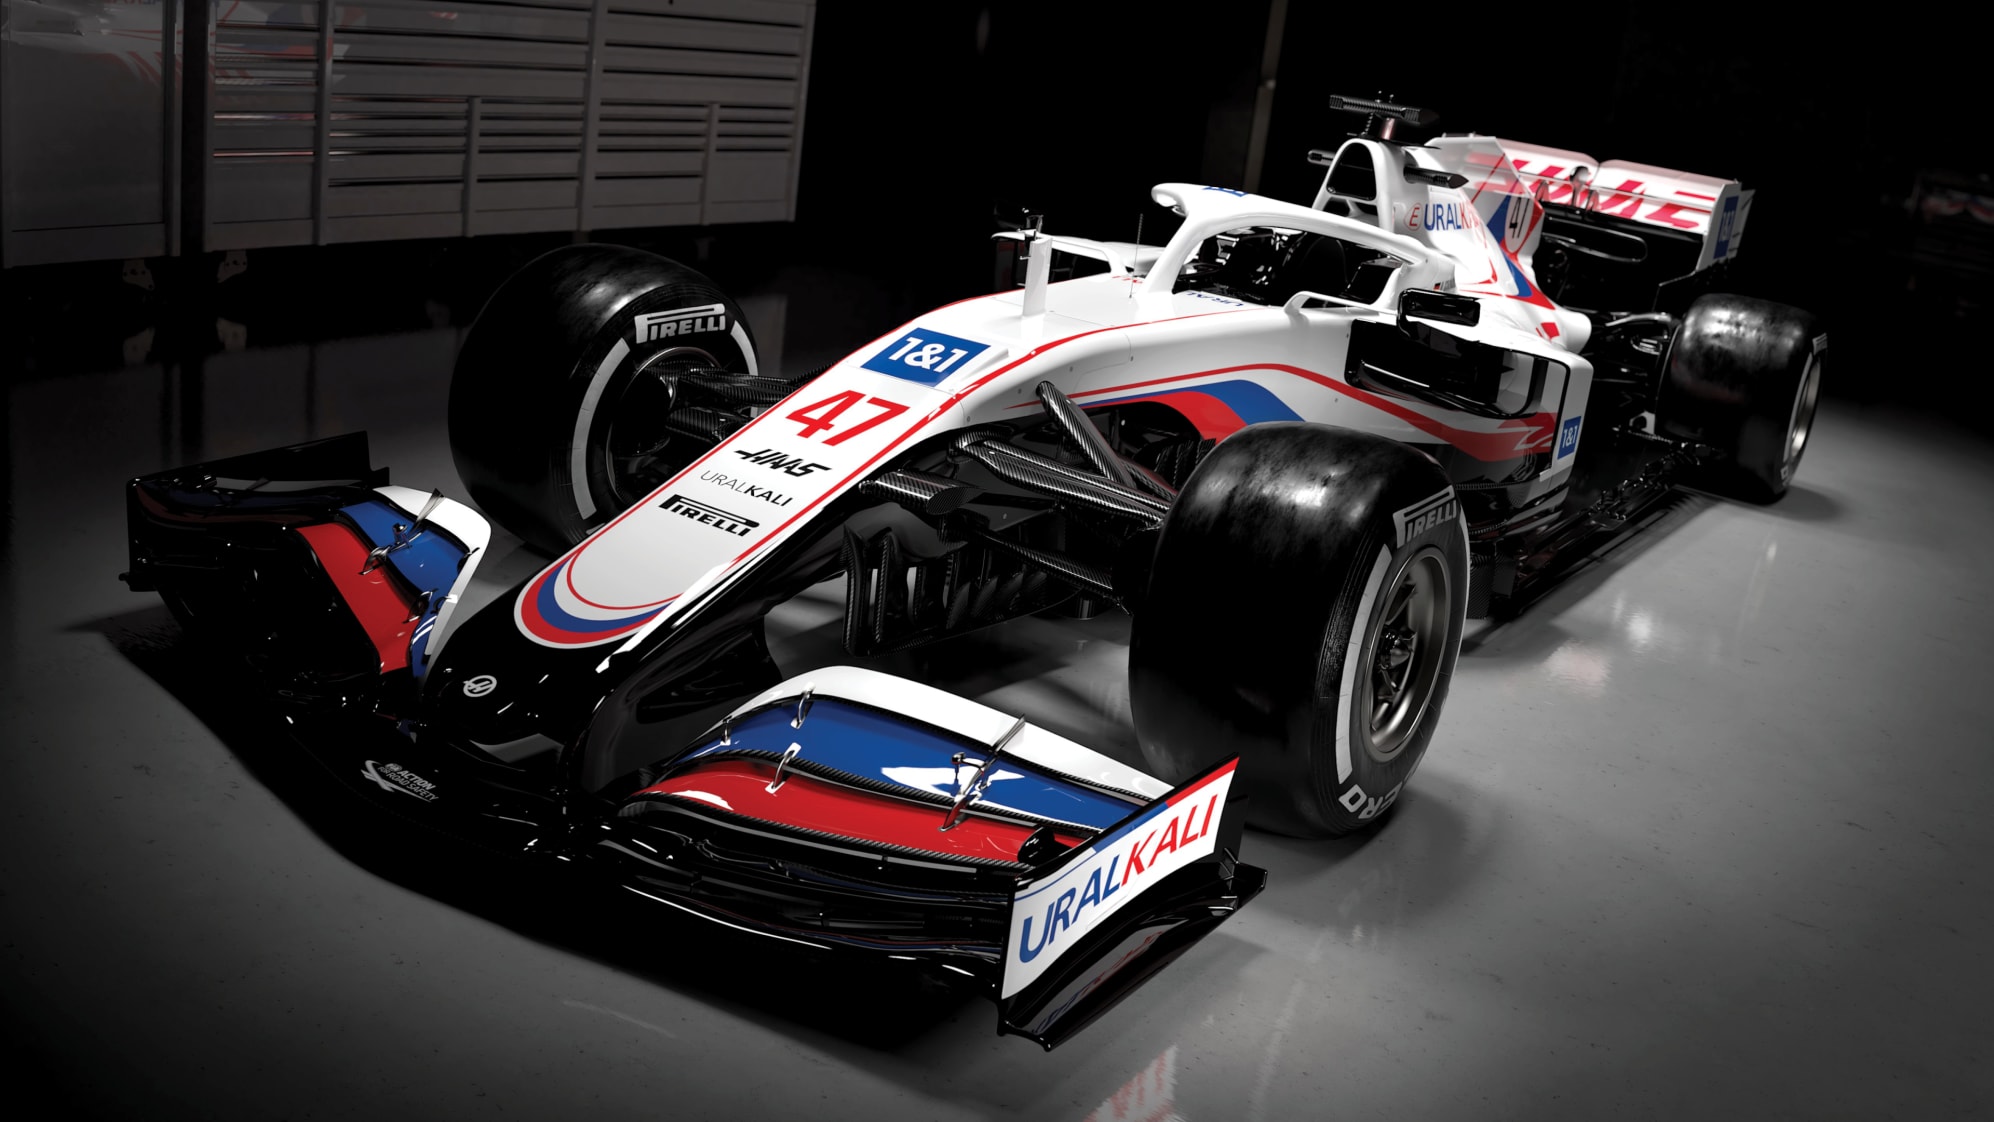 FIRST LOOK Haas reveal fresh new livery for Schumacher and Mazepin’s